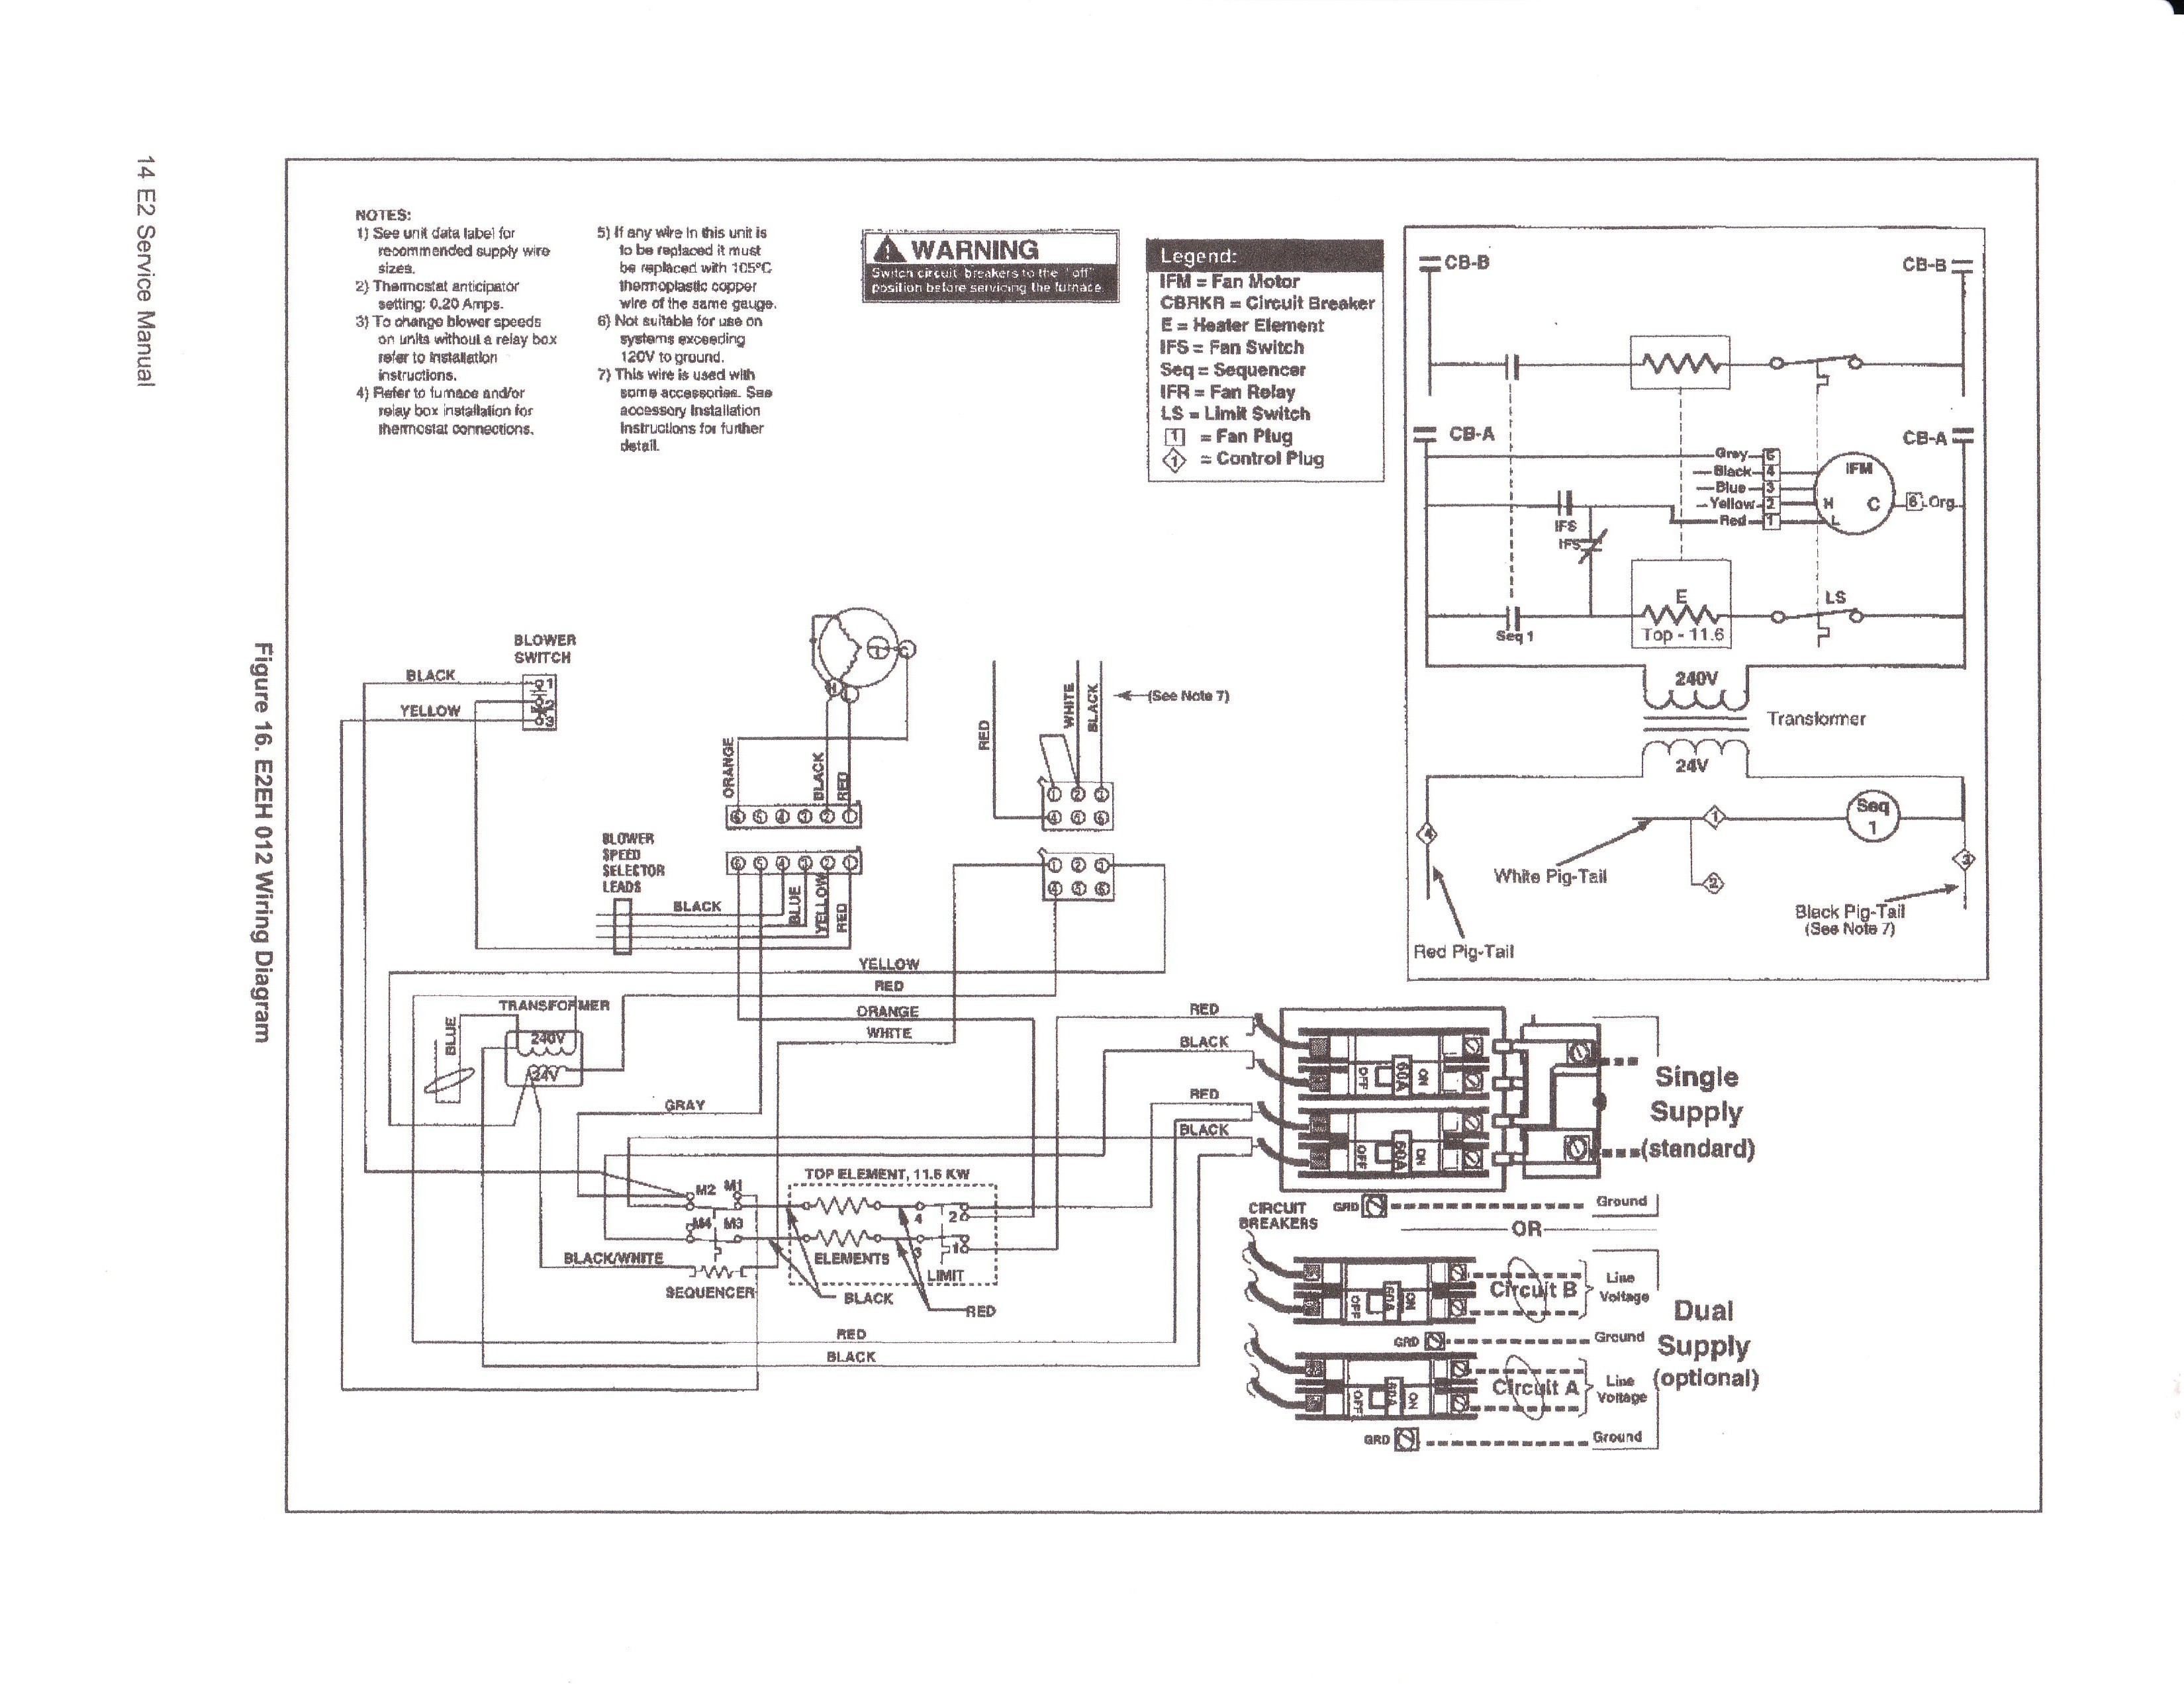 Wesco Electric Furnace Wiring Diagram New Lennox Electric Furnace Wiring Diagram